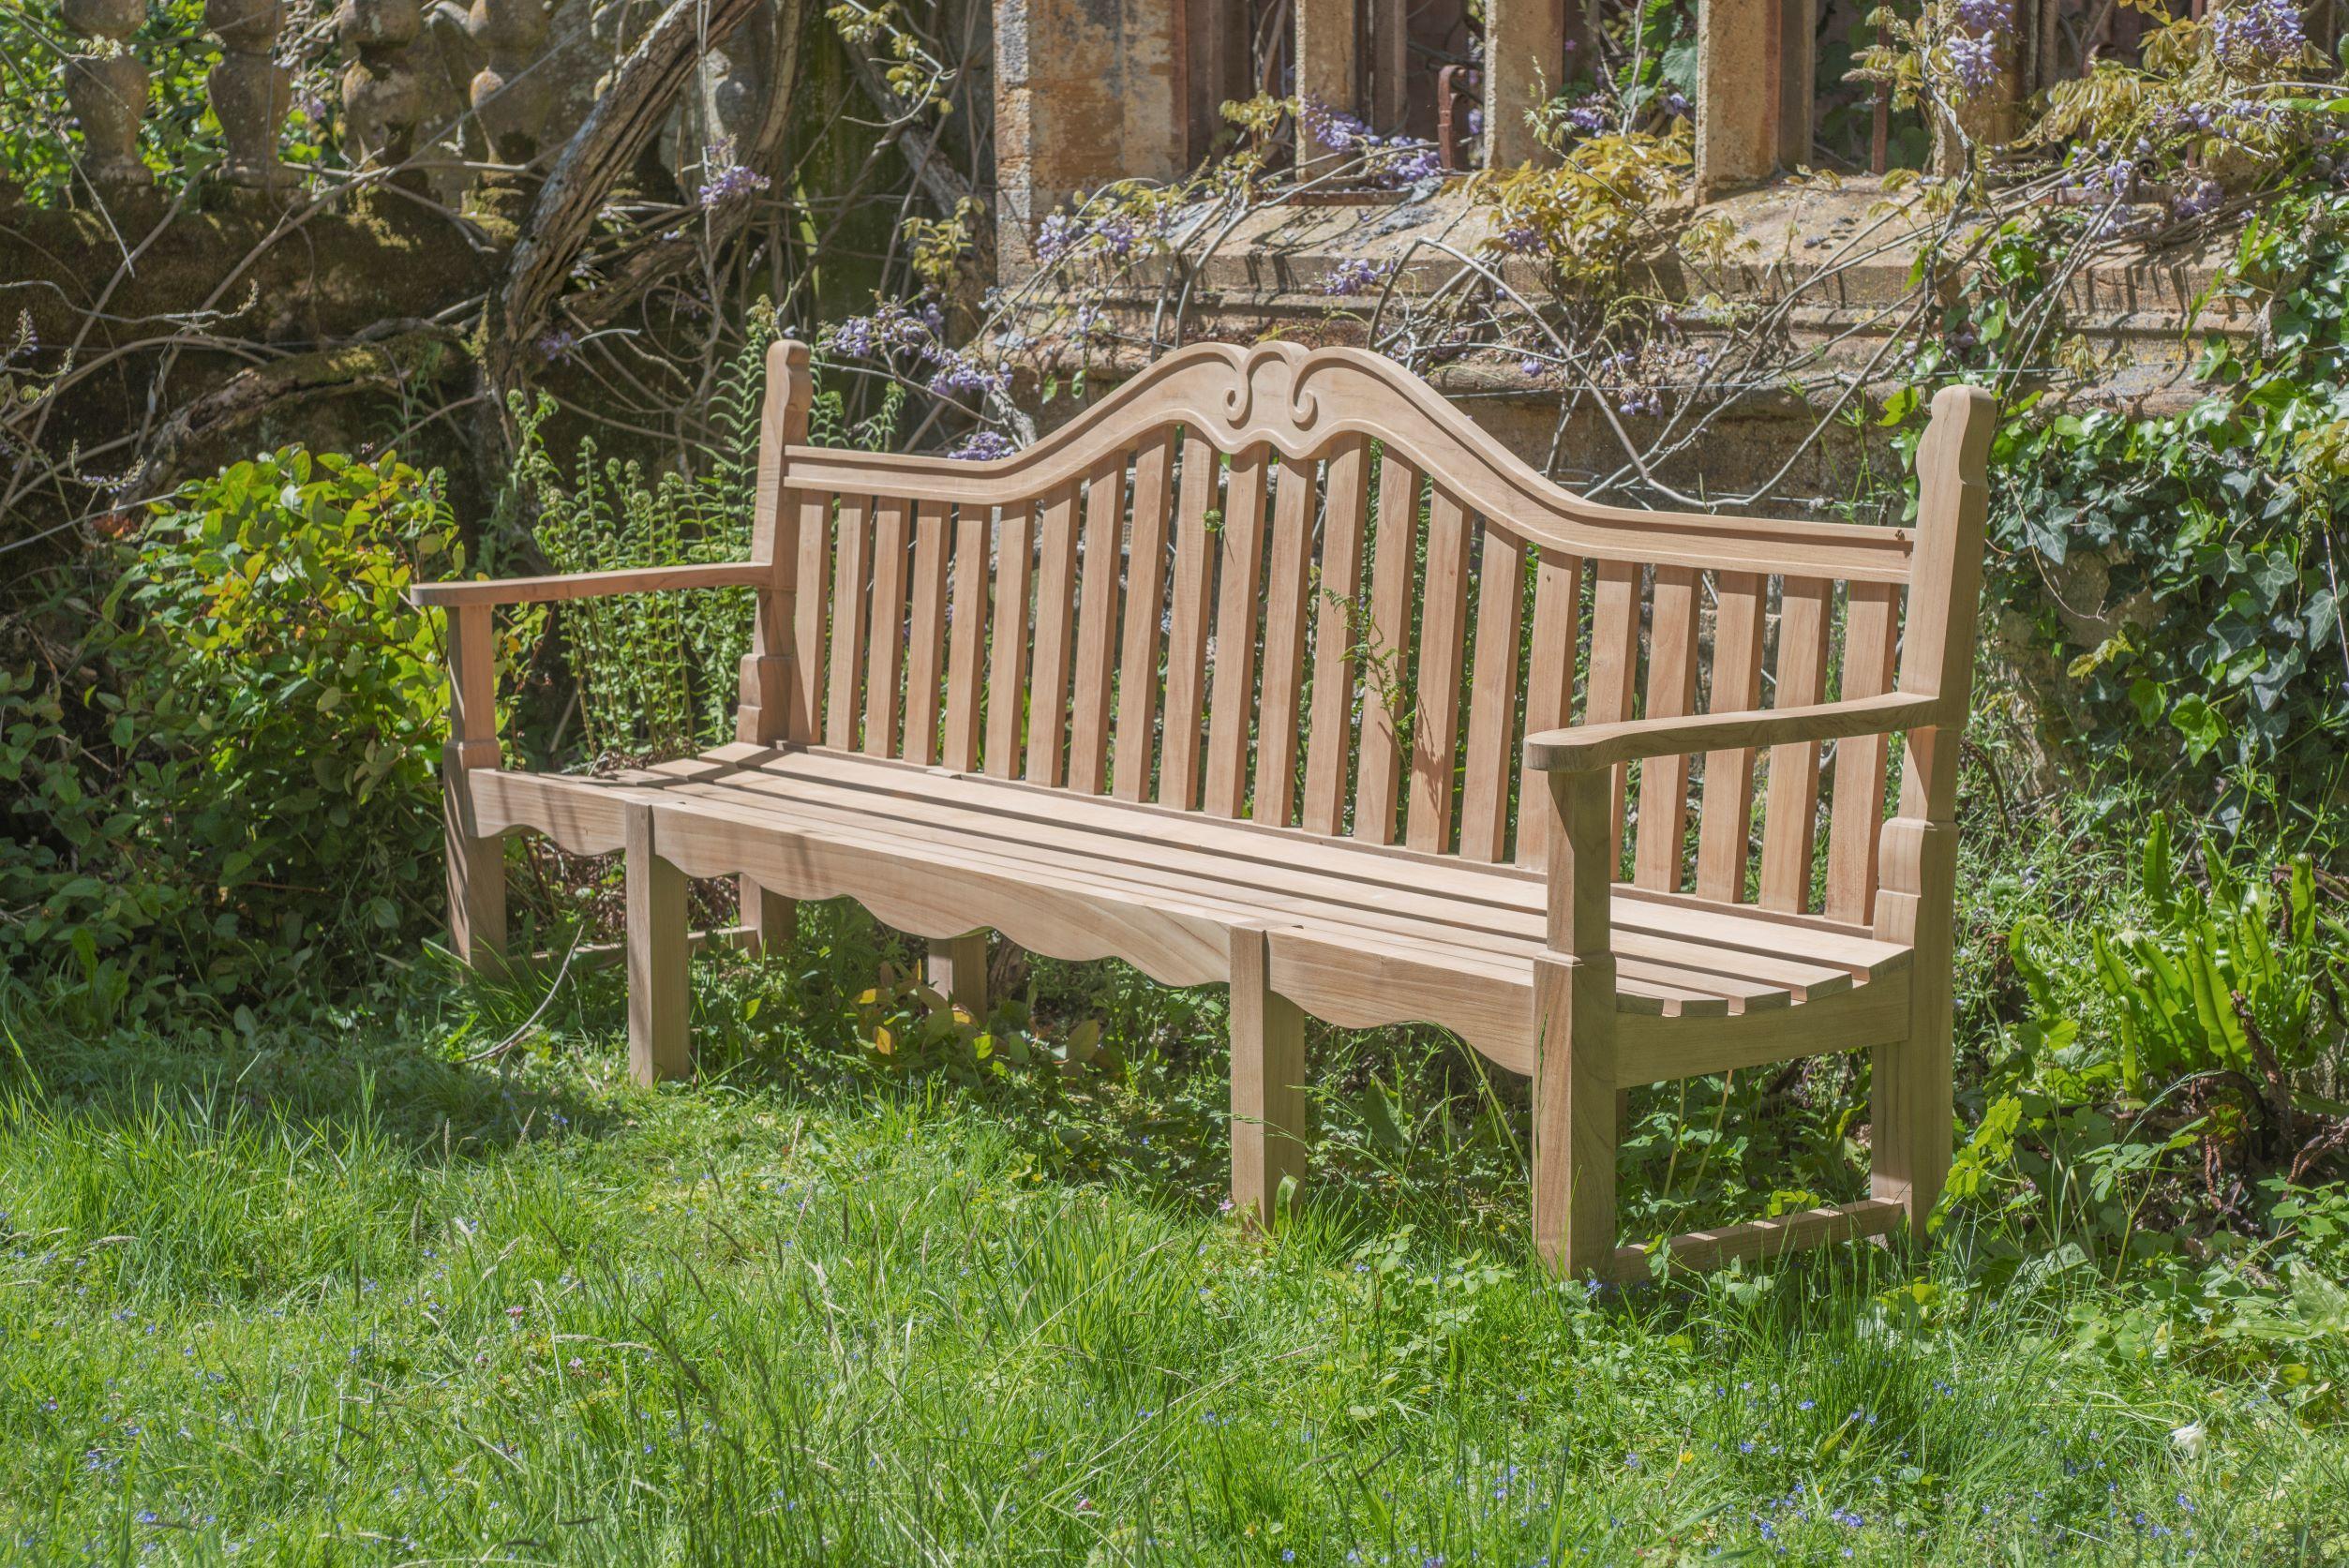 An exceptional Georgian Camel back design carved teak slatted back garden bench. Exterior seat pads can be supplied if required. Seat pad upholstered in client’s own material.

Bespoke sizing, design adaptations and finishing available. 

We are